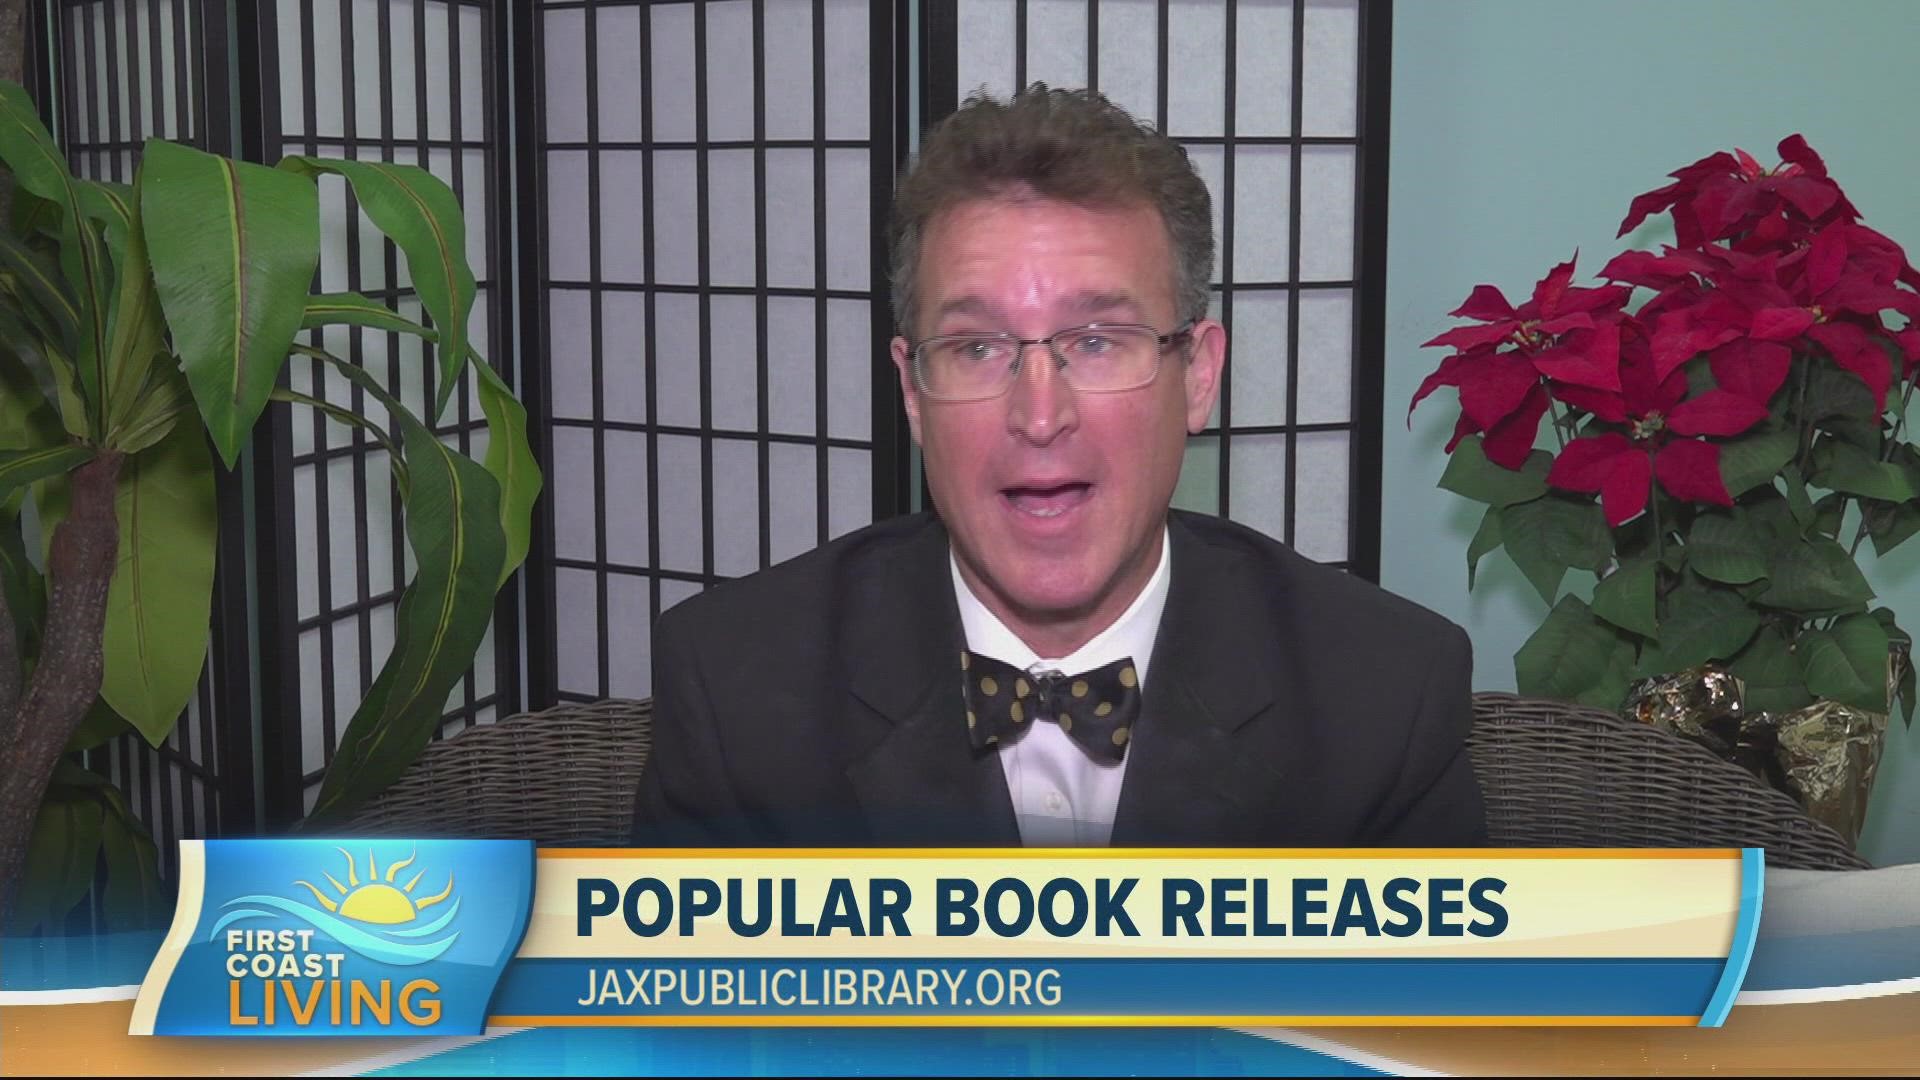 Chris Boivin of the Jacksonville Public Library
shares a list of the most popular books of 2021 and must-reads for 2022!